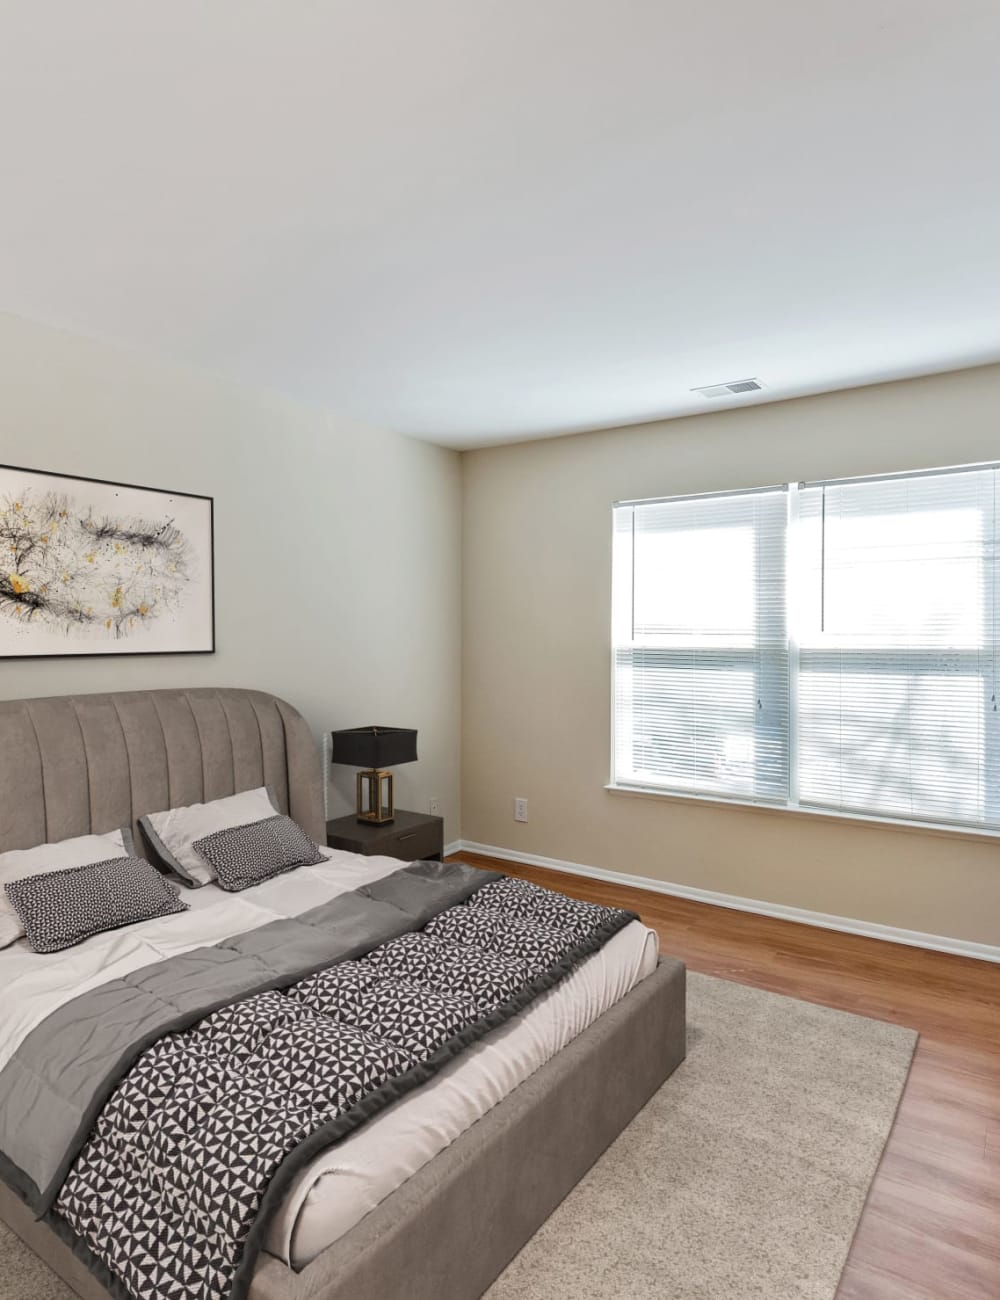 Wood flooring in a furnished apartment bedroom at Stonecreek Club in Germantown, Maryland